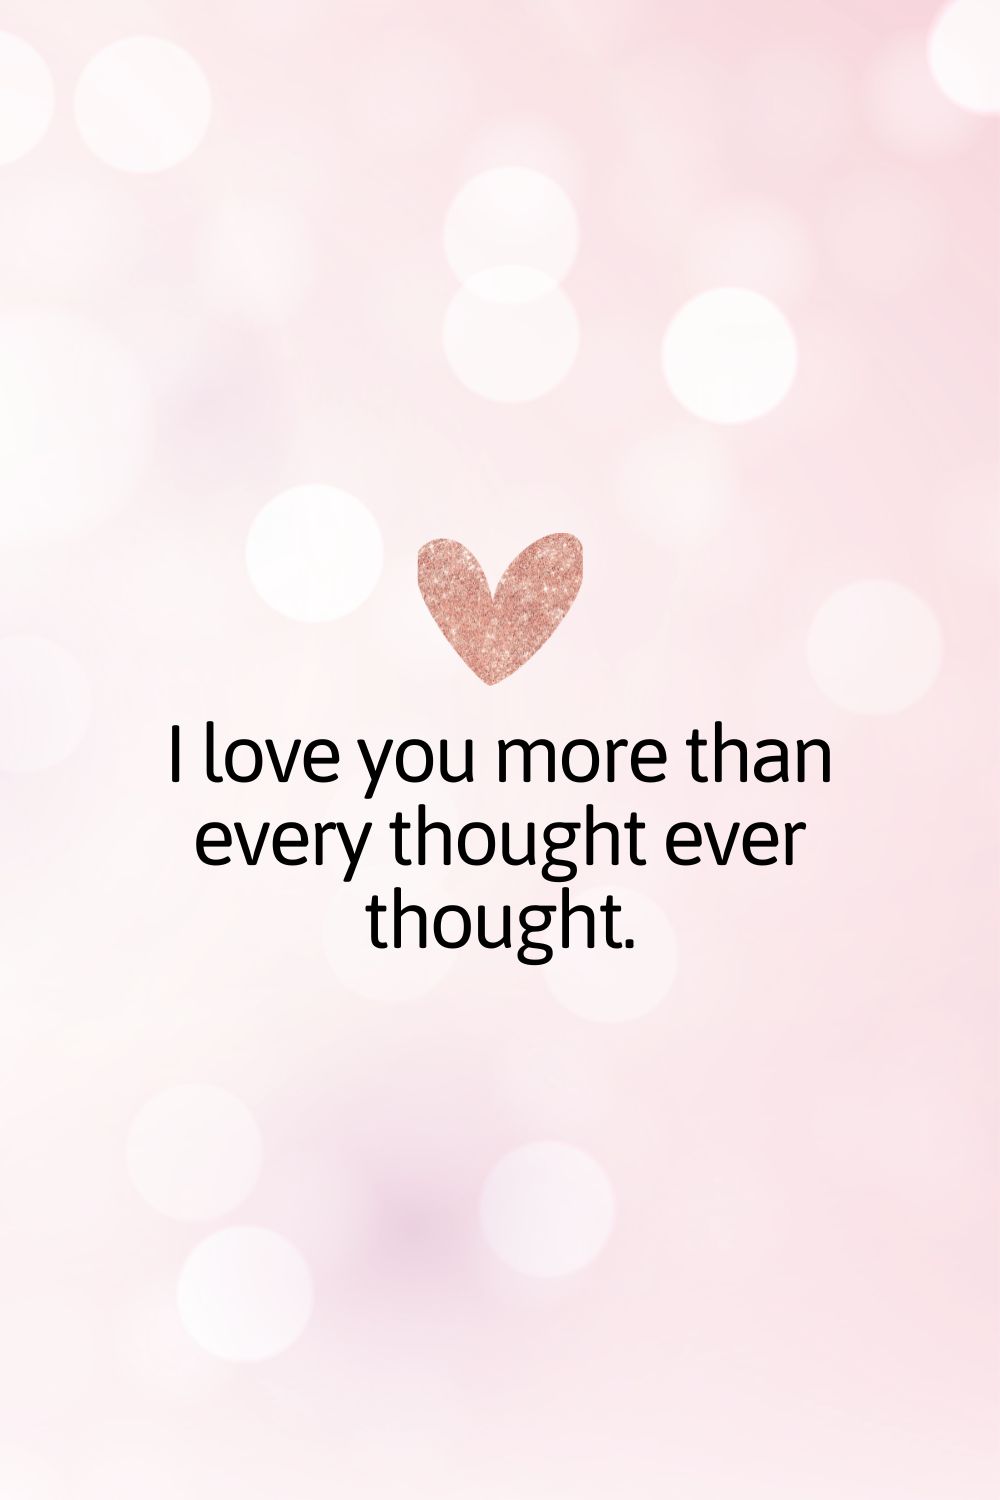 I love you more than every thought ever thought